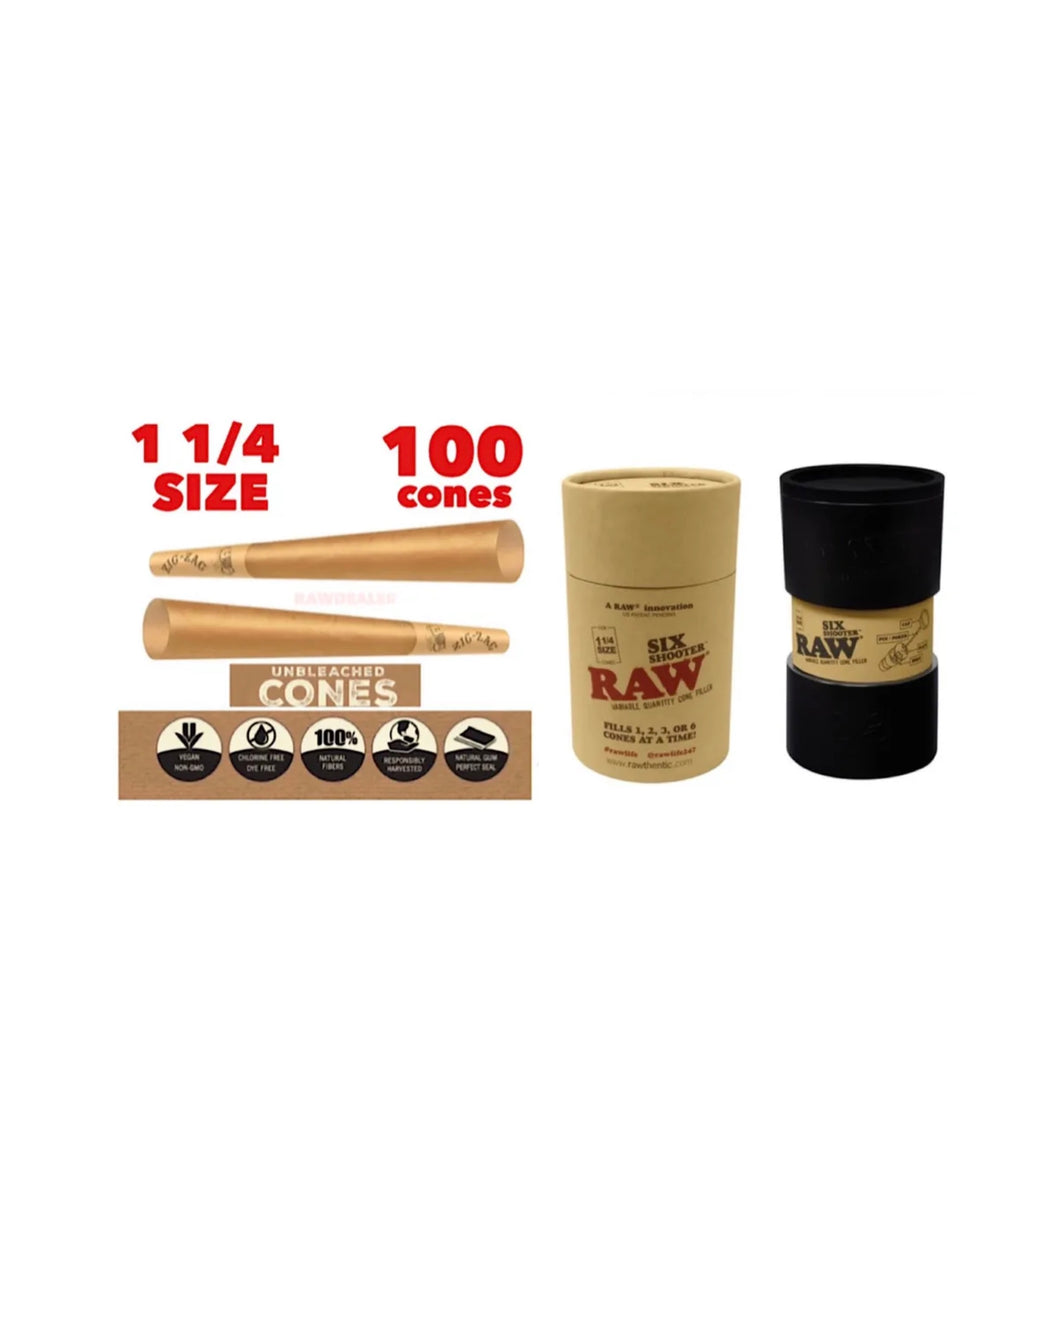 Zig Zag 1 1/4 size Unbleached Cone(100PK)+raw 1 1/4 size cone 6 six Shooter filler